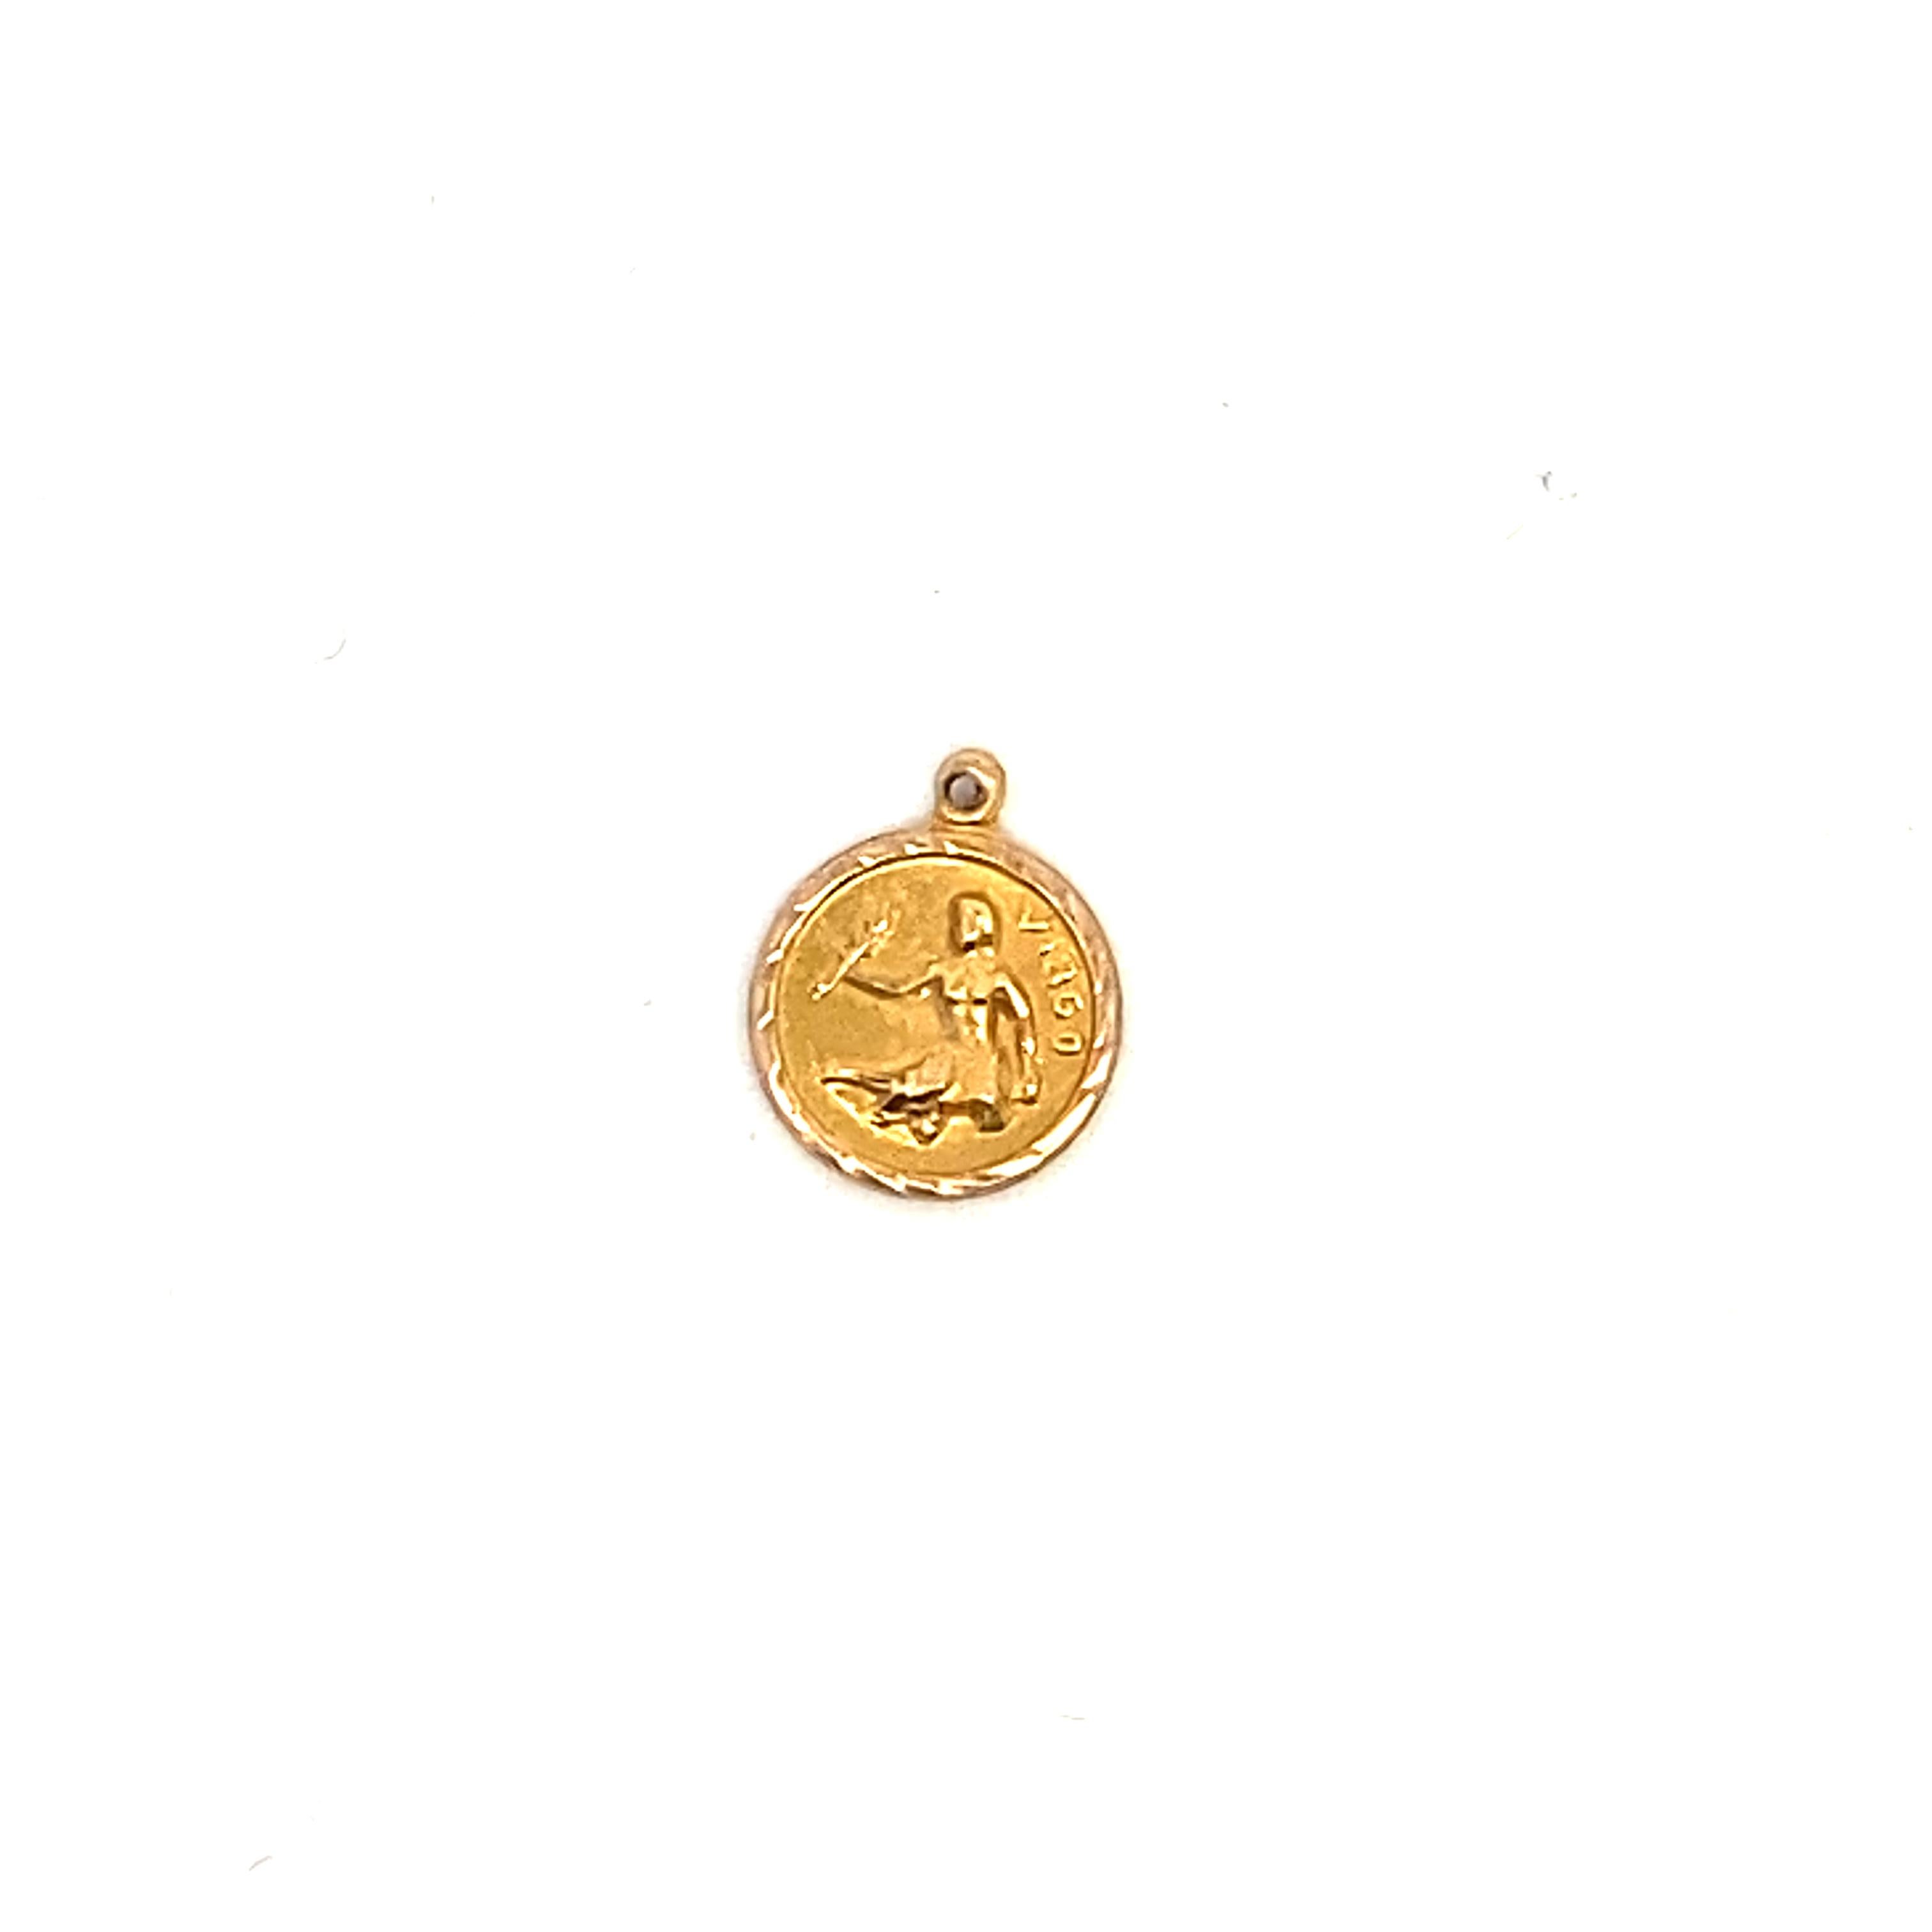 Featuring our 14k yellow gold Virgo Zodiac Charm Pendant. Measuring 9.8mm and 0.7Dwt/1.0gm - this charm is a perfect addition to your gold charm bracelet or as a pendant on a stacking necklace. We thoroughly inspect, clean and polish all of our